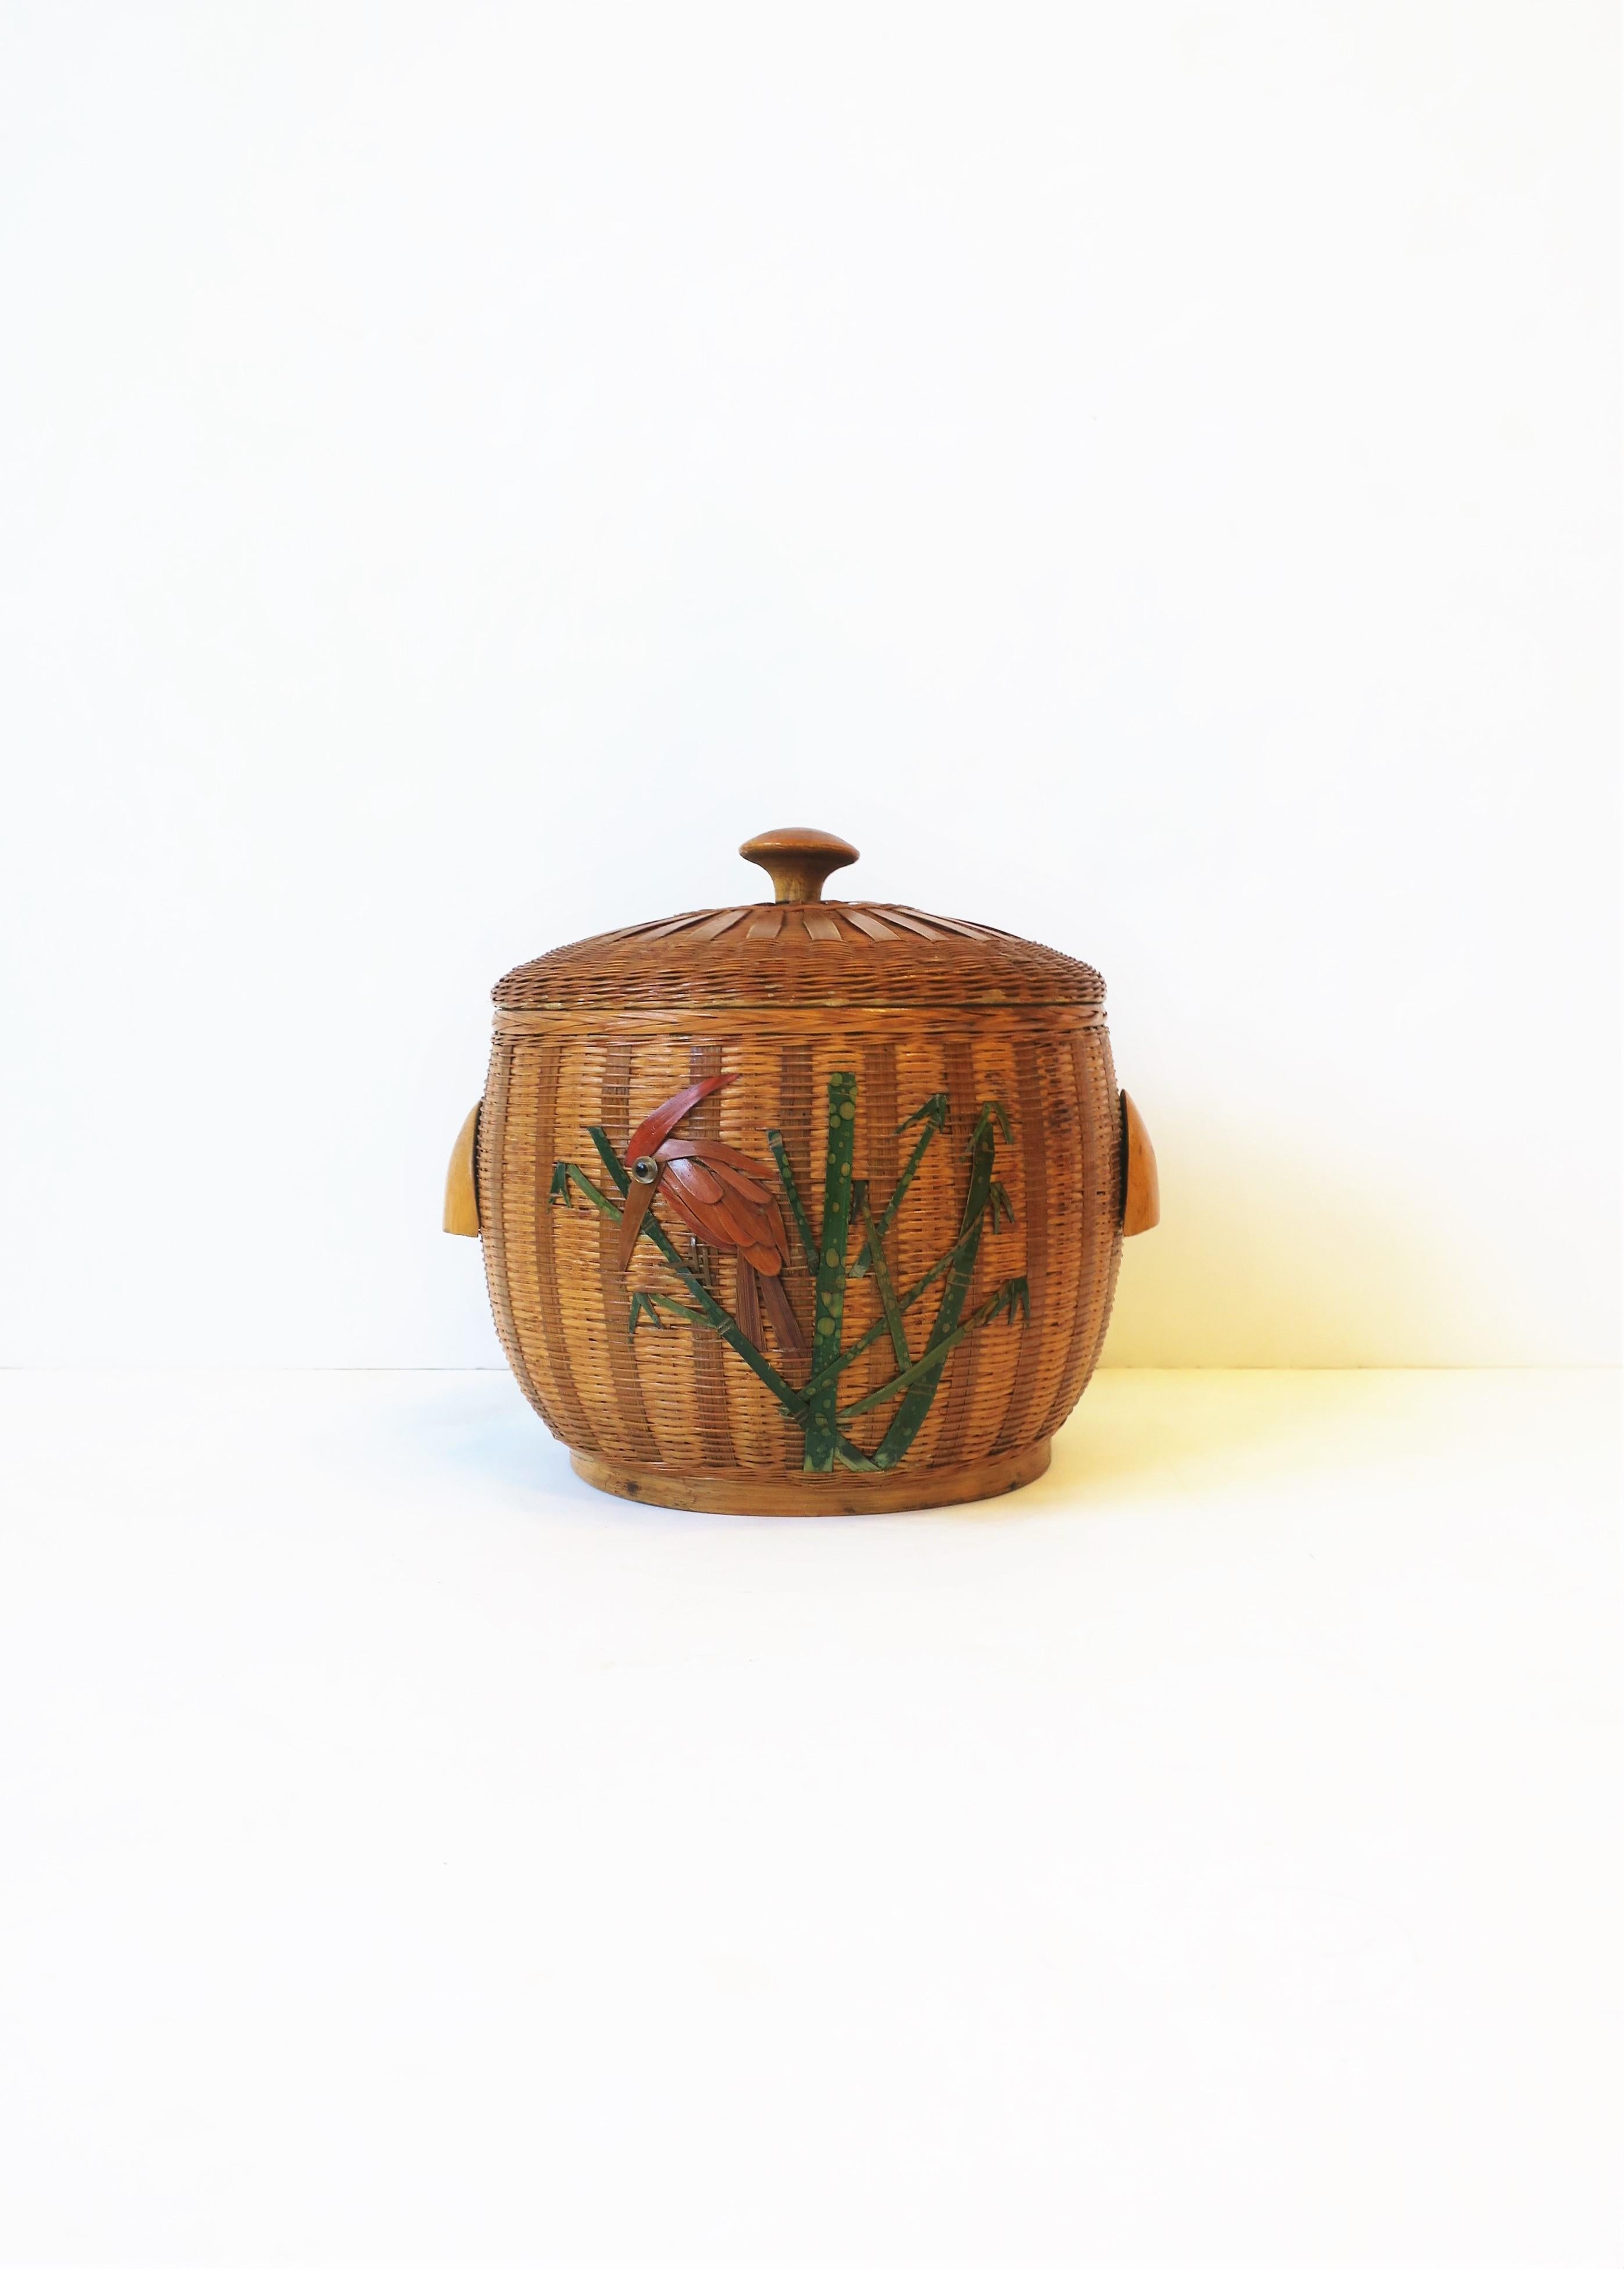 A beautiful vintage wicker ice bucket with enamel metal interior pot and lid. Beautiful wicker design embracing enamel pot and lid, and a bird on bamboo branch design on front. Small wood handles on sides. Round wood knob on lid. Piece is early to